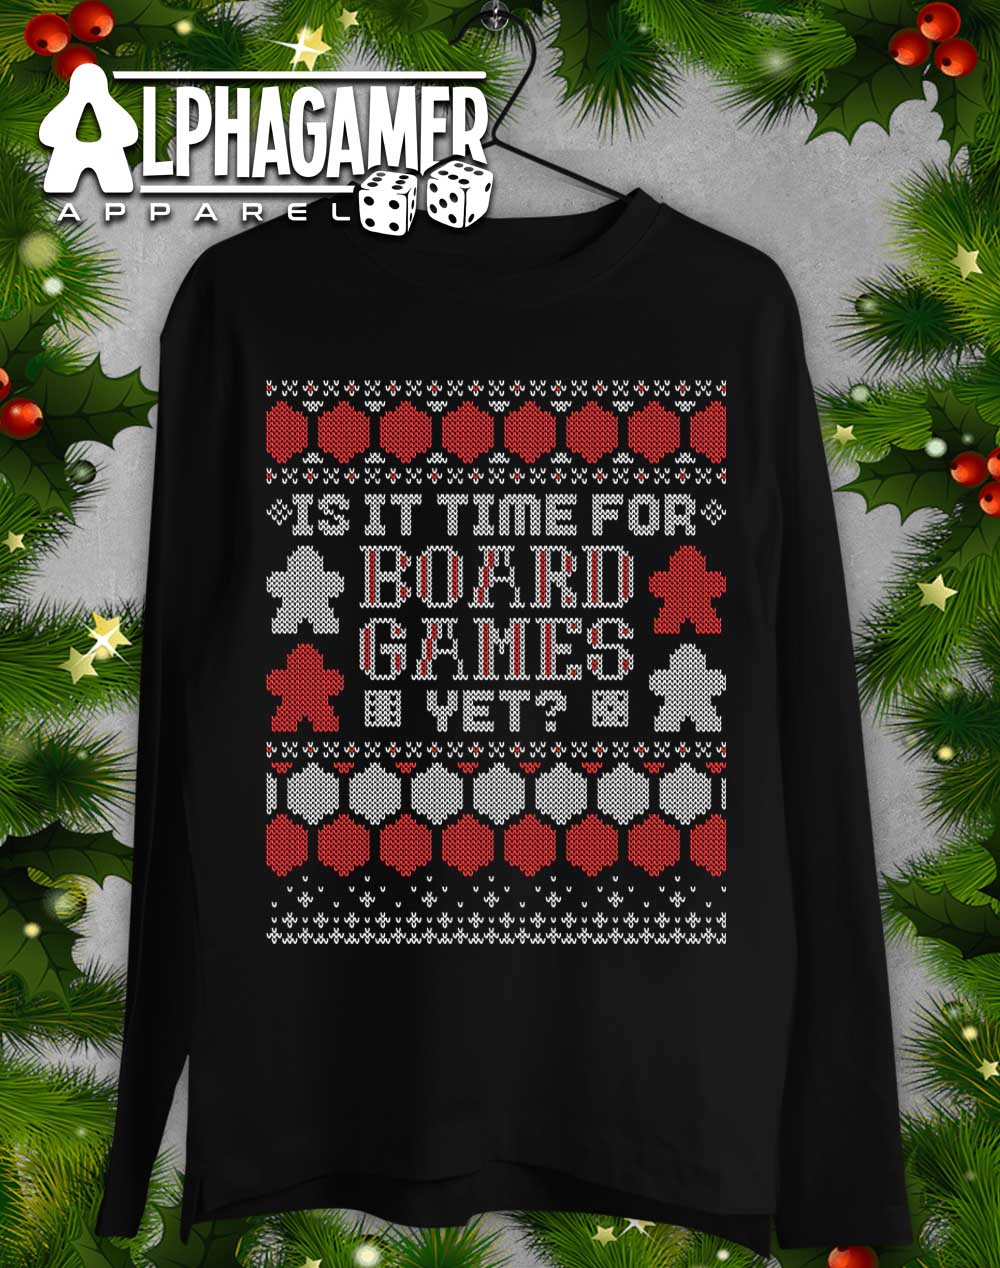 Is It Time For Board Games Long Sleeve T-Shirt